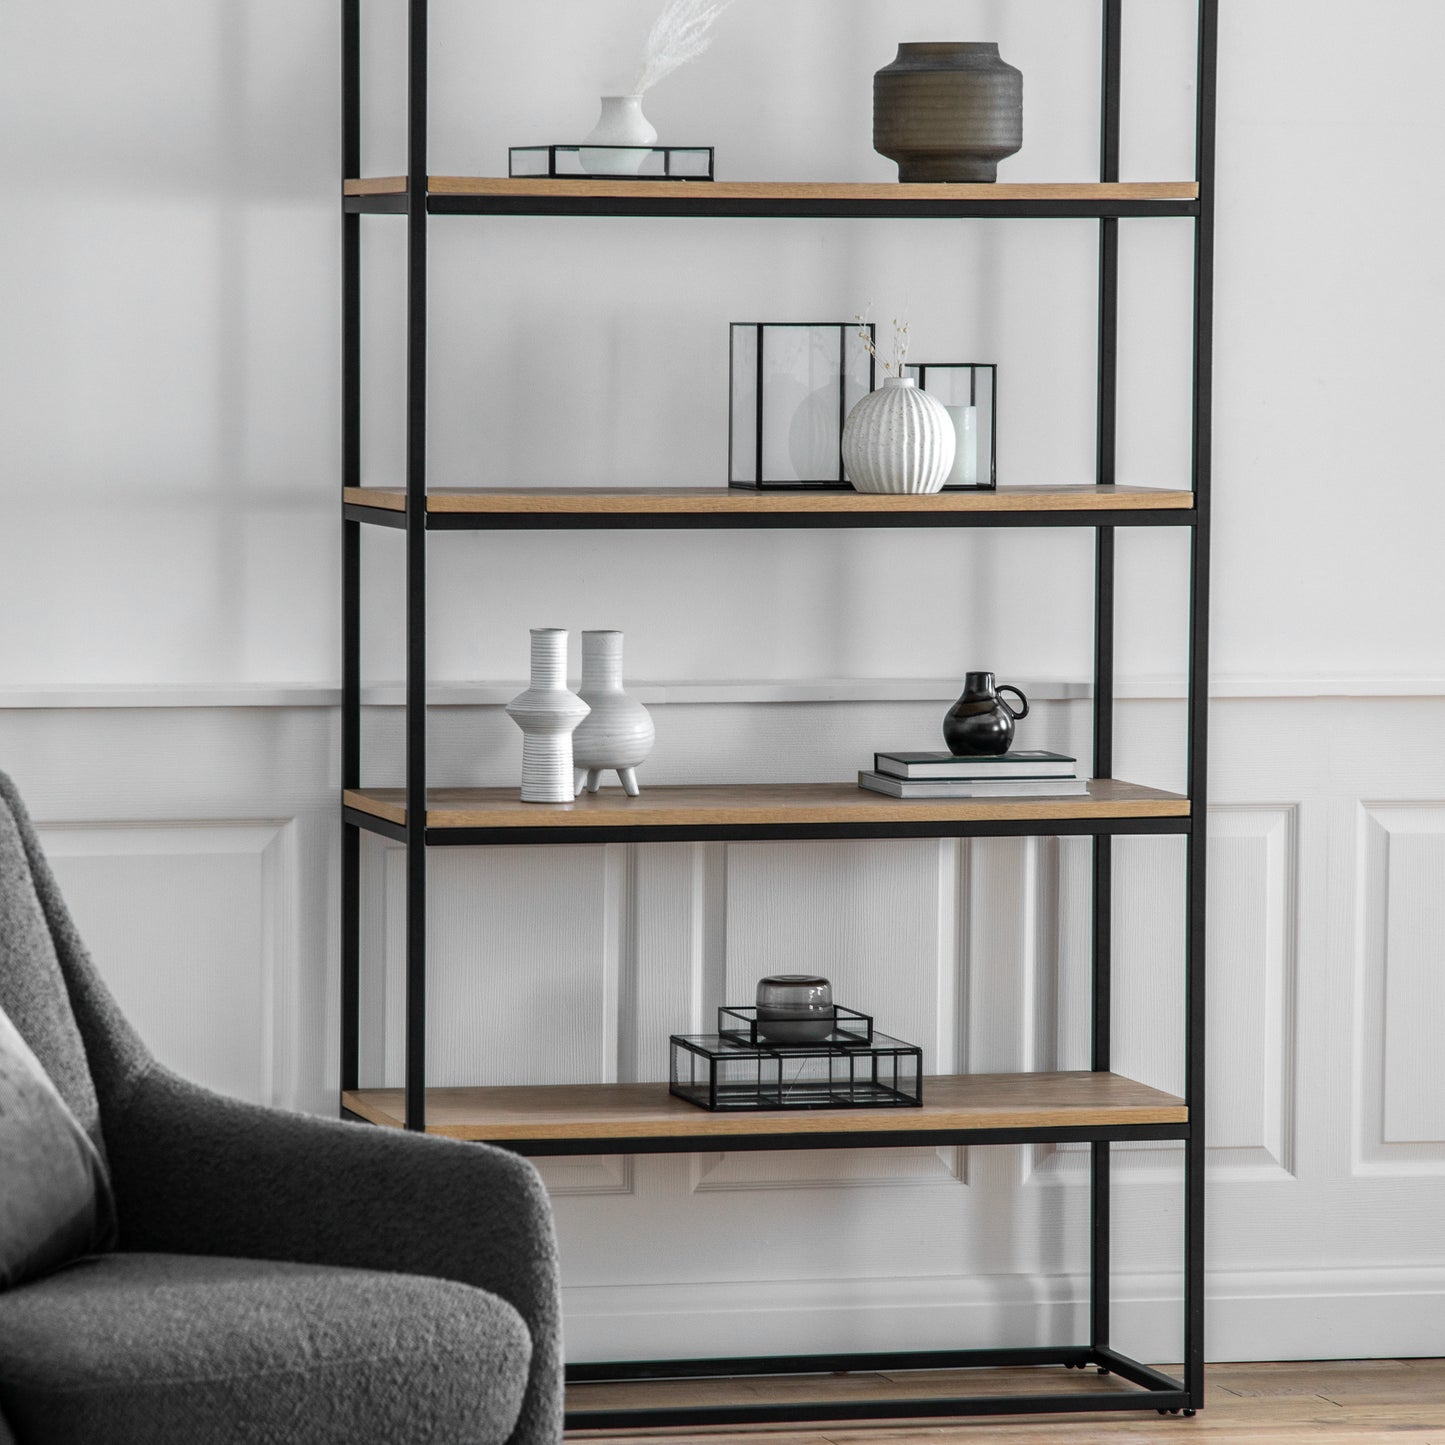 A Staverton Display Unit 1000x380x1800mm from Kikiathome.co.uk enhances the interior decor in a living room.